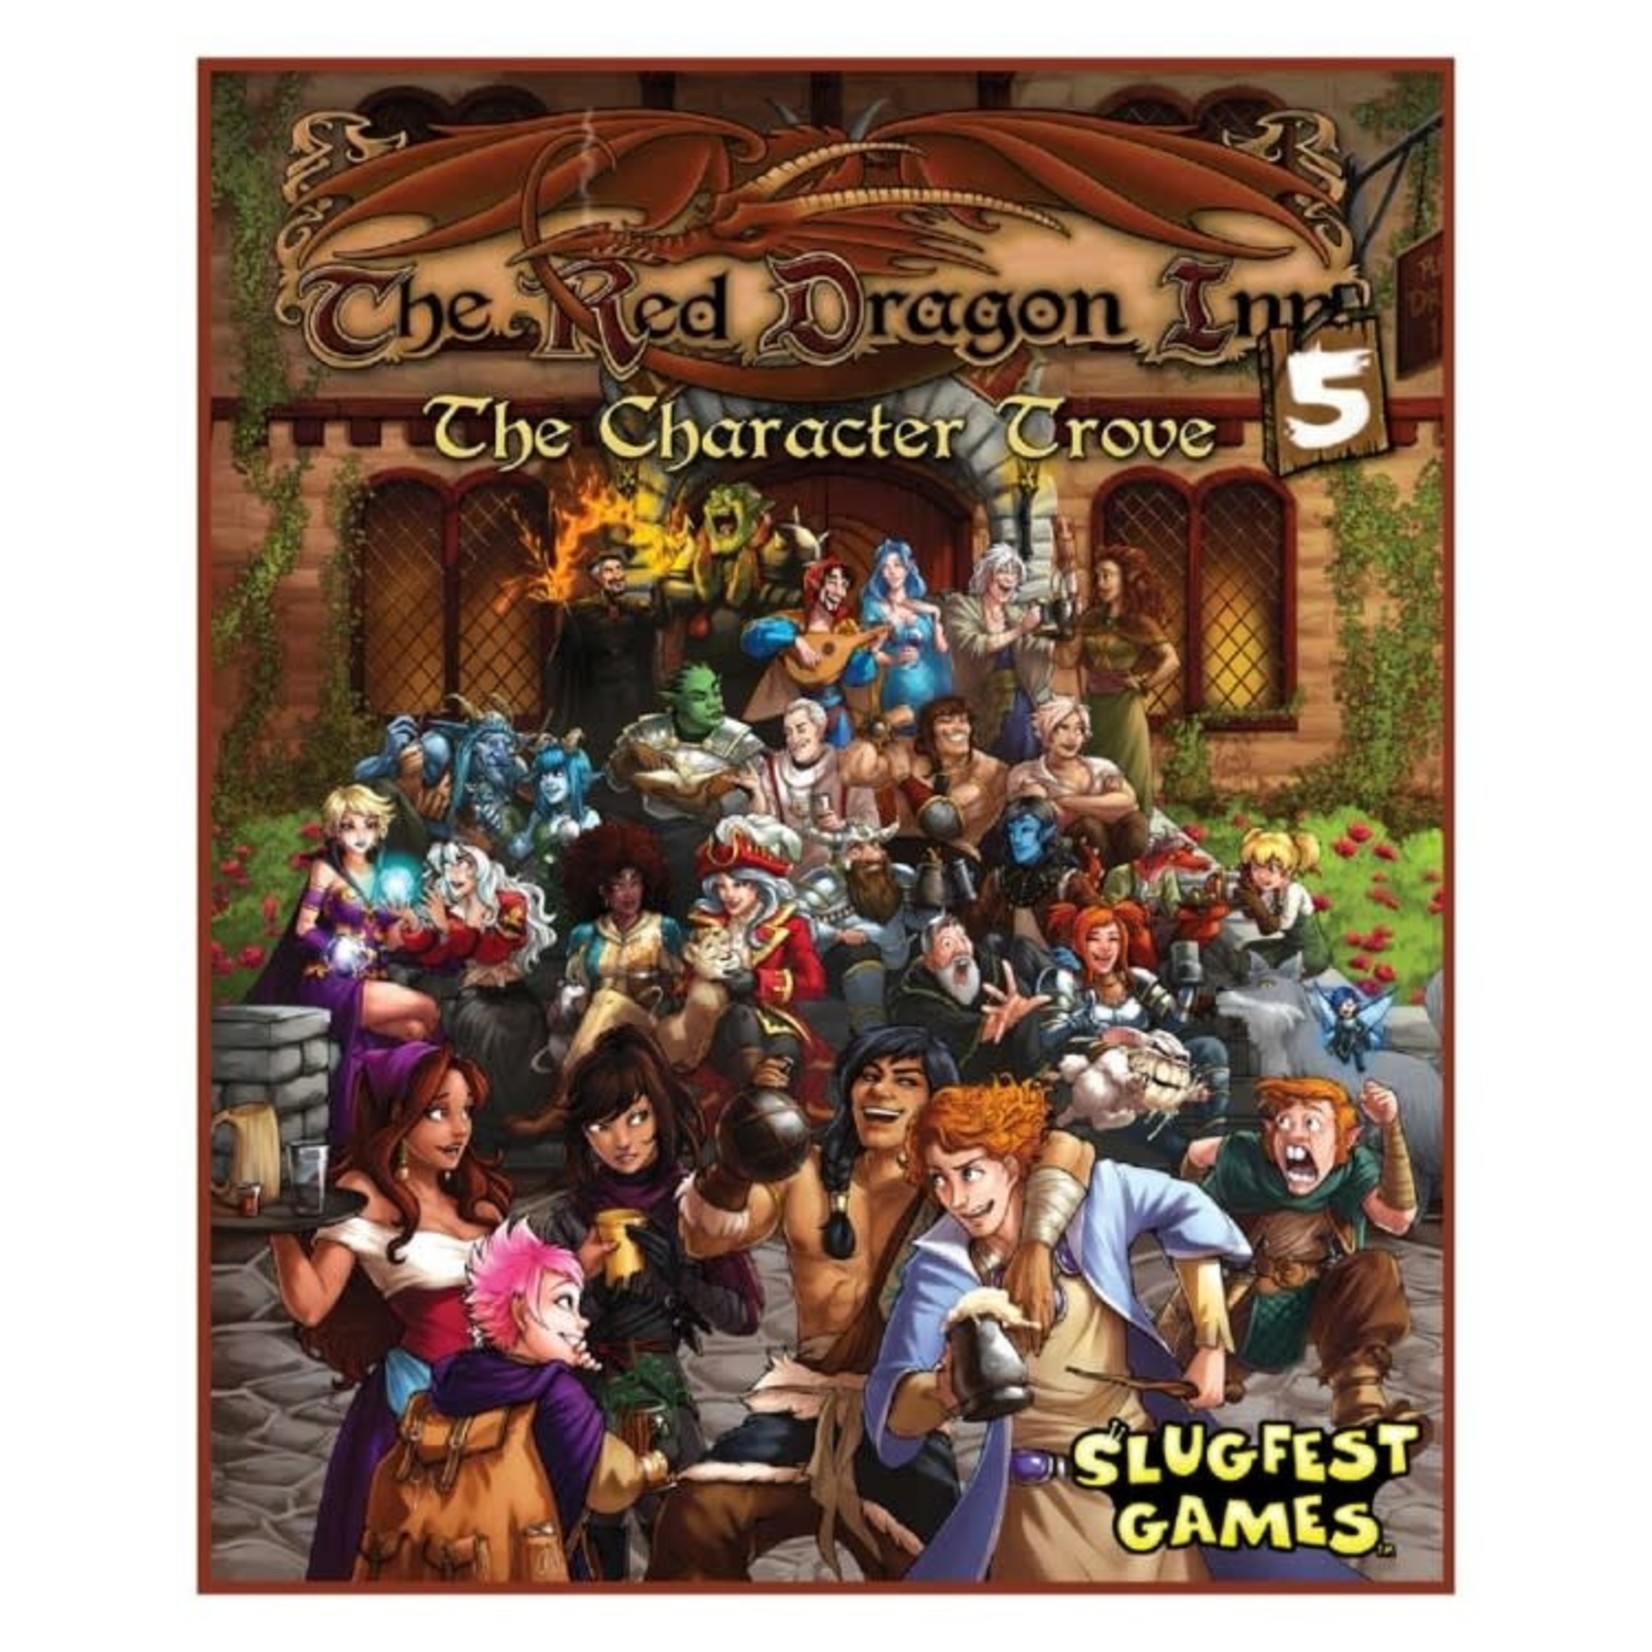 Slugfest Games Red Dragon Inn 5 The Character Trove Expansion Box